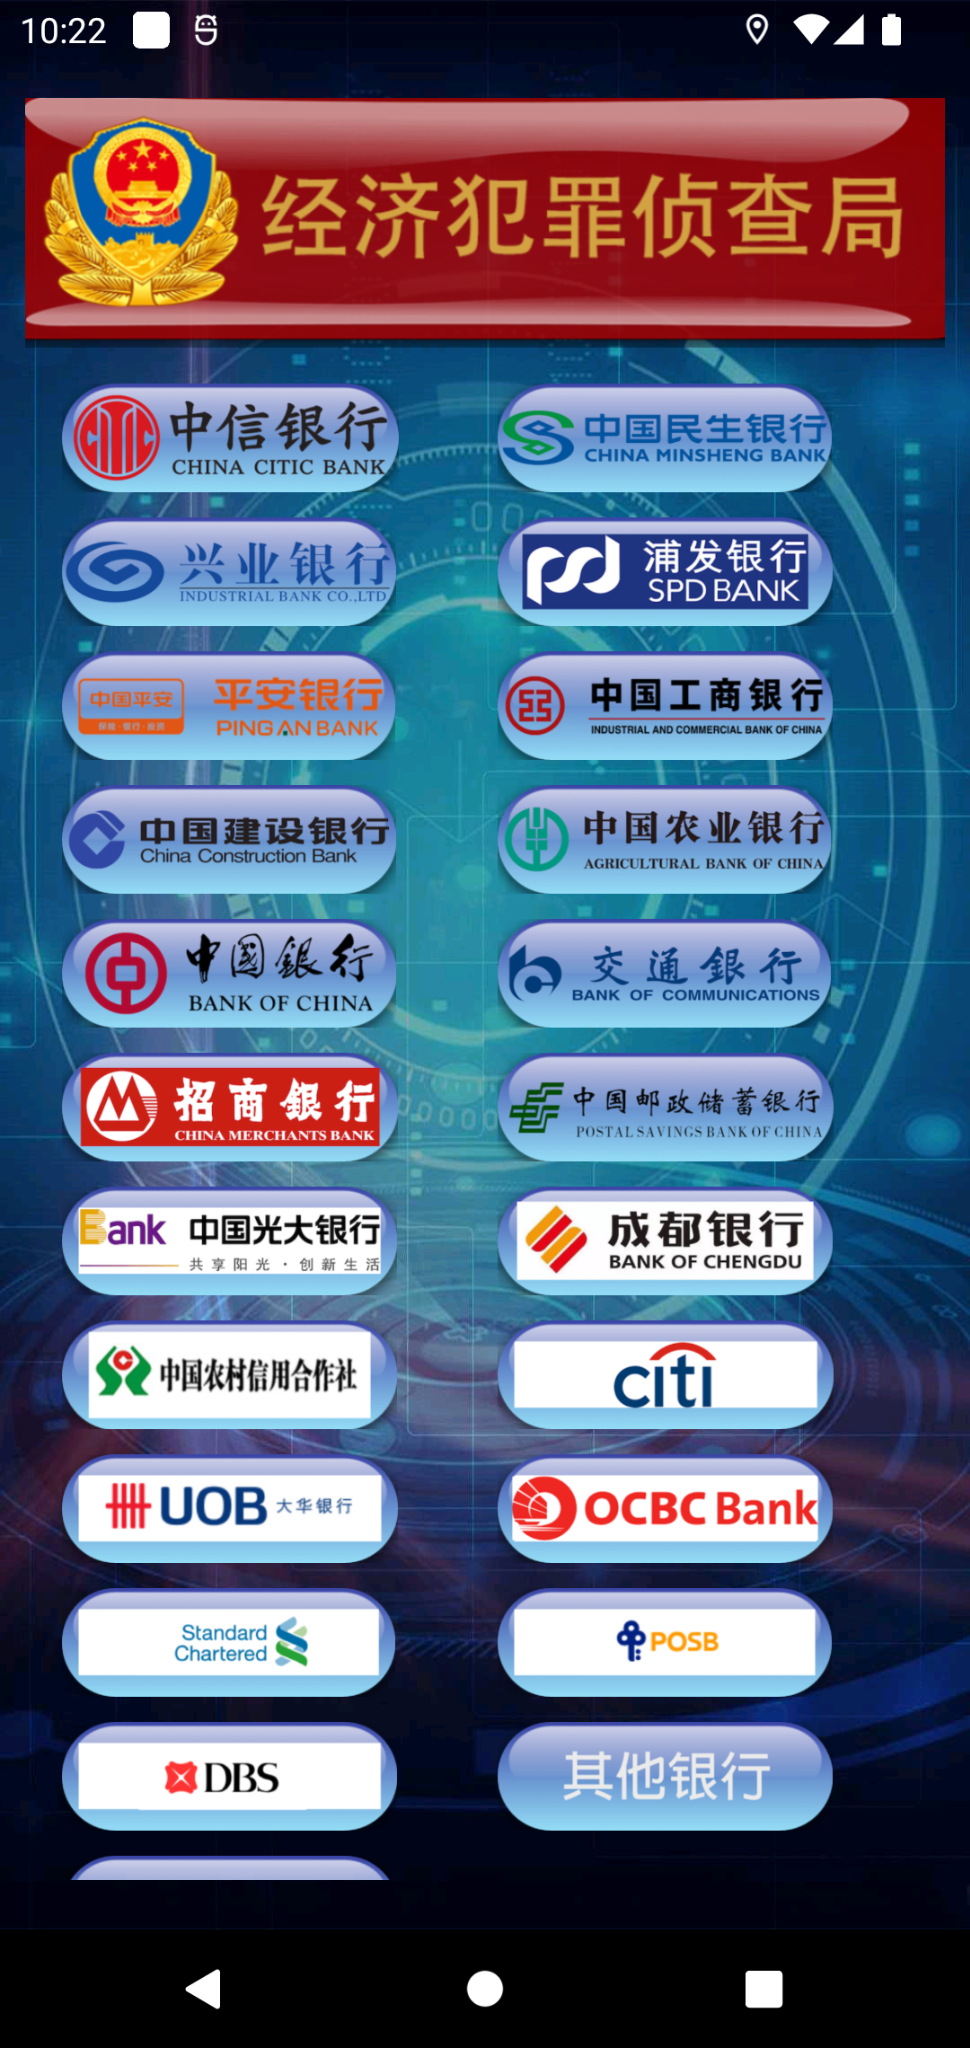 Image 4 is an Android mobile phone screenshot. The malicious application asks for sensitive personal information. The characters are in Chinese. 